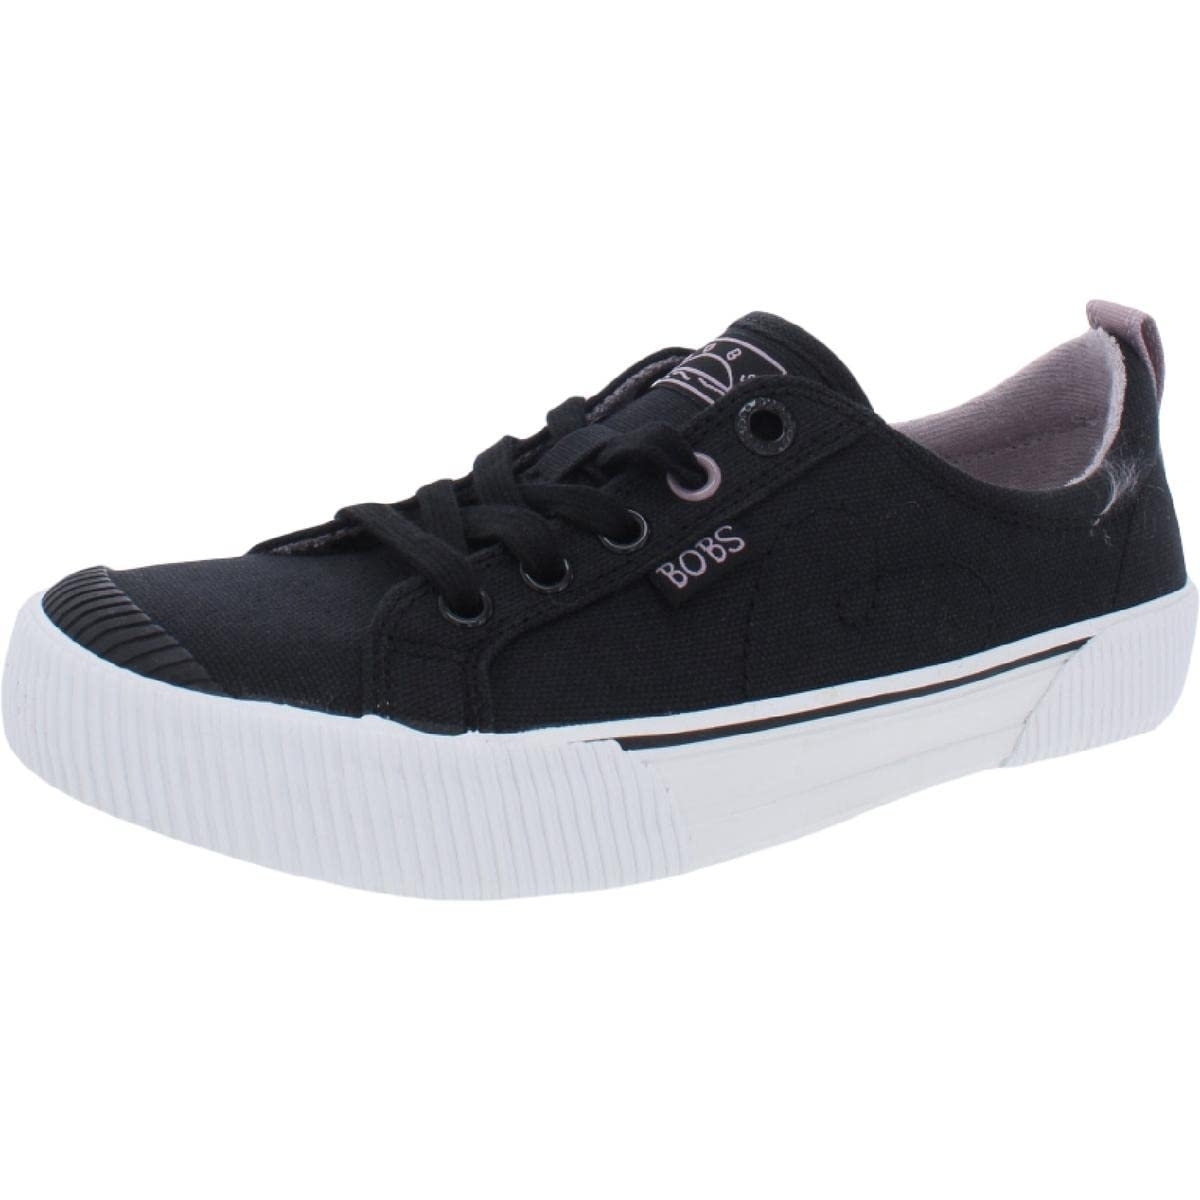 Skechers BOBS From Womens Bobs B Wilder-Casual Clash Casual And Fashion Sneakers BLACK - BLACK, 8.5